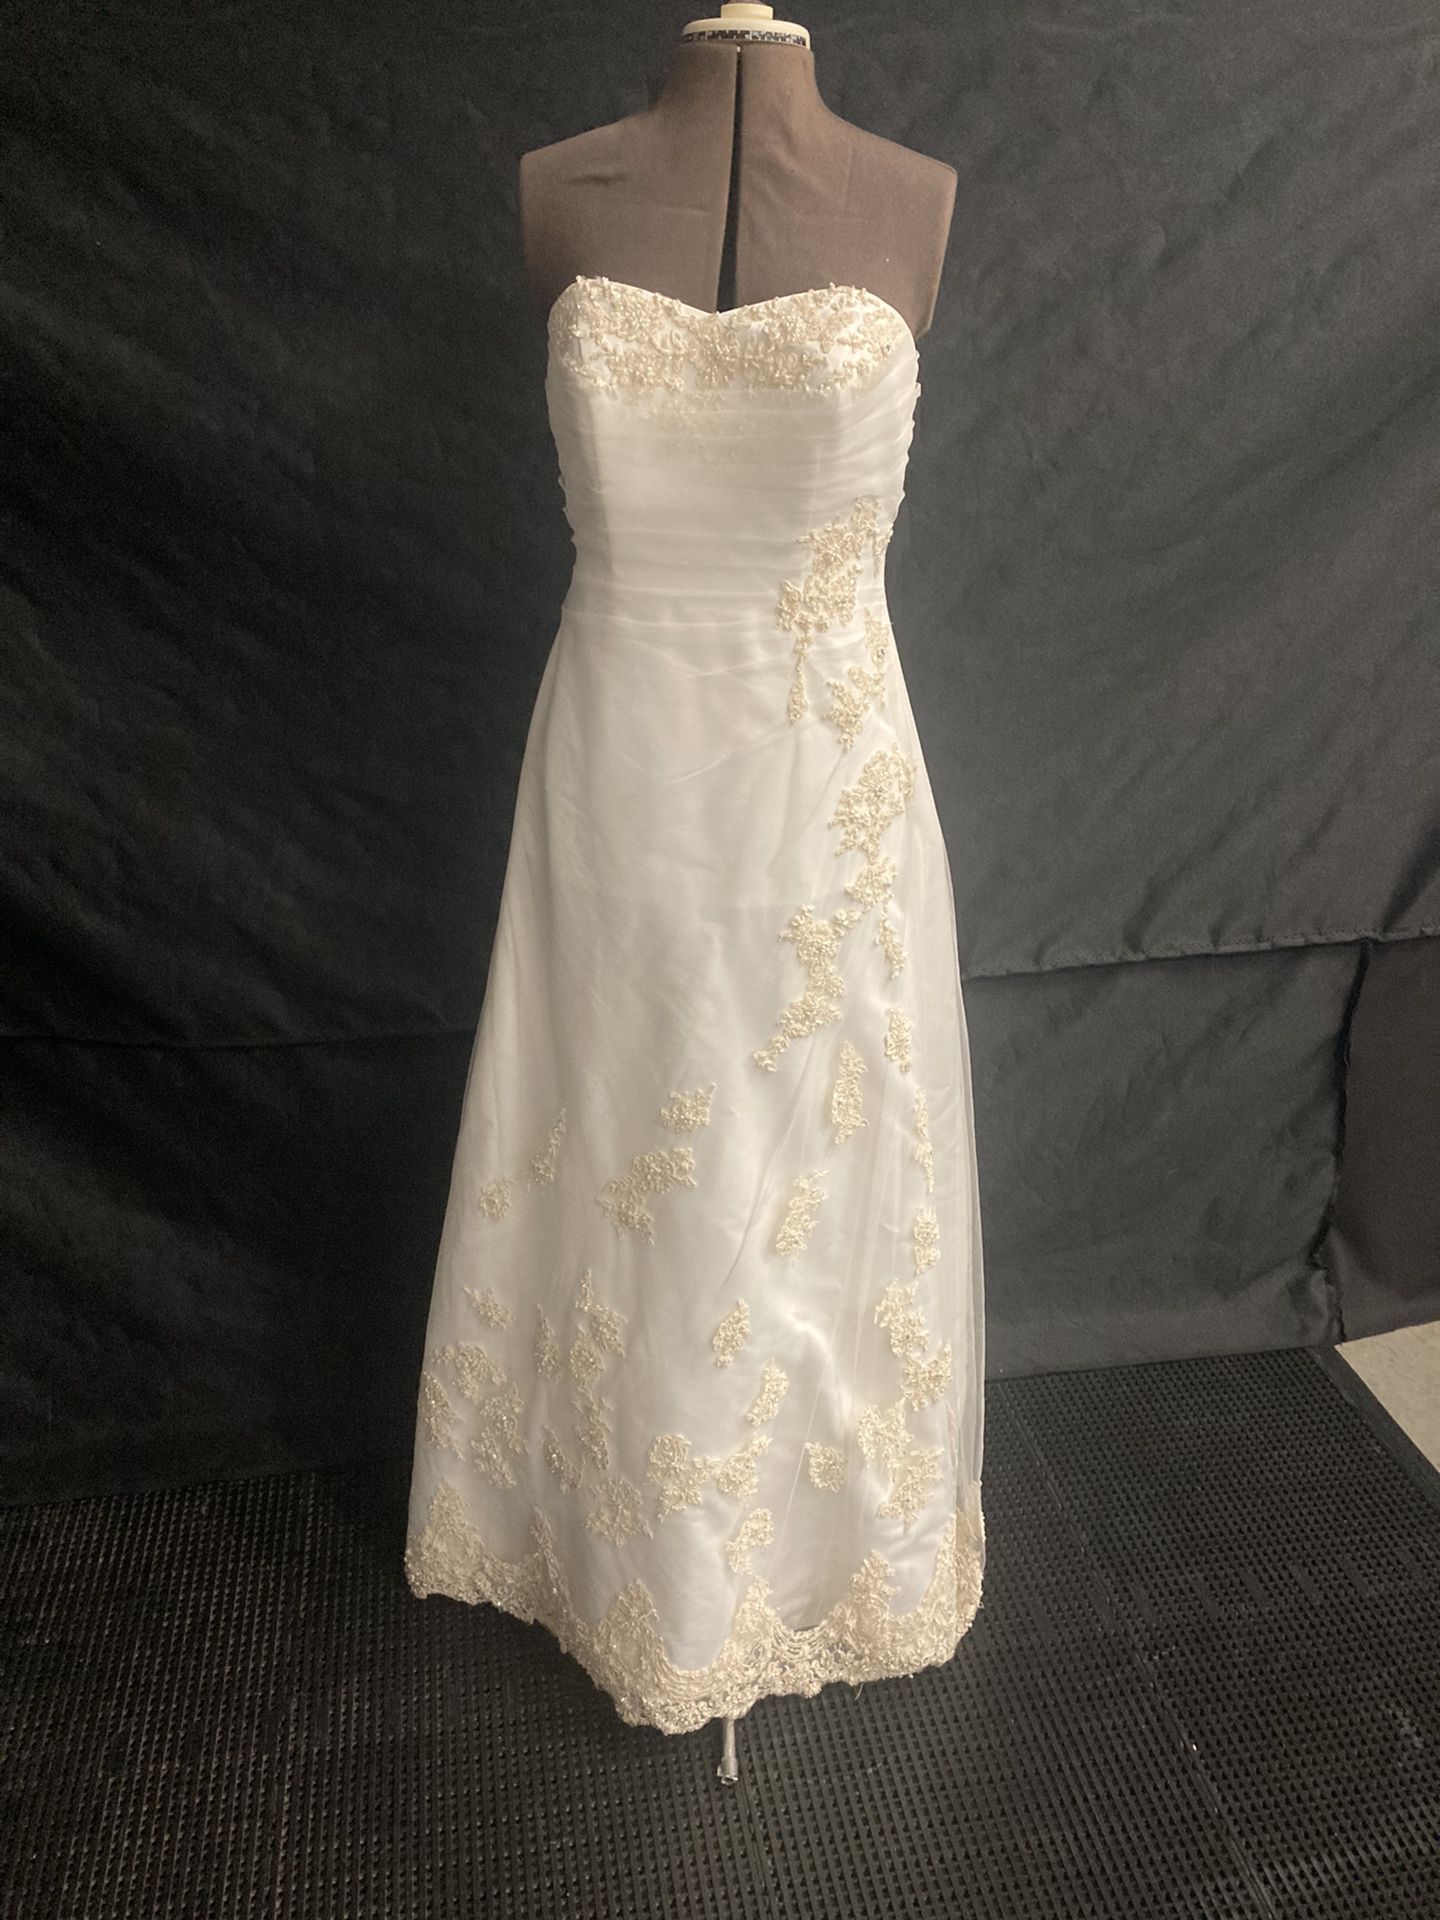 Size 12 Wedding Gown From Davids Bridal